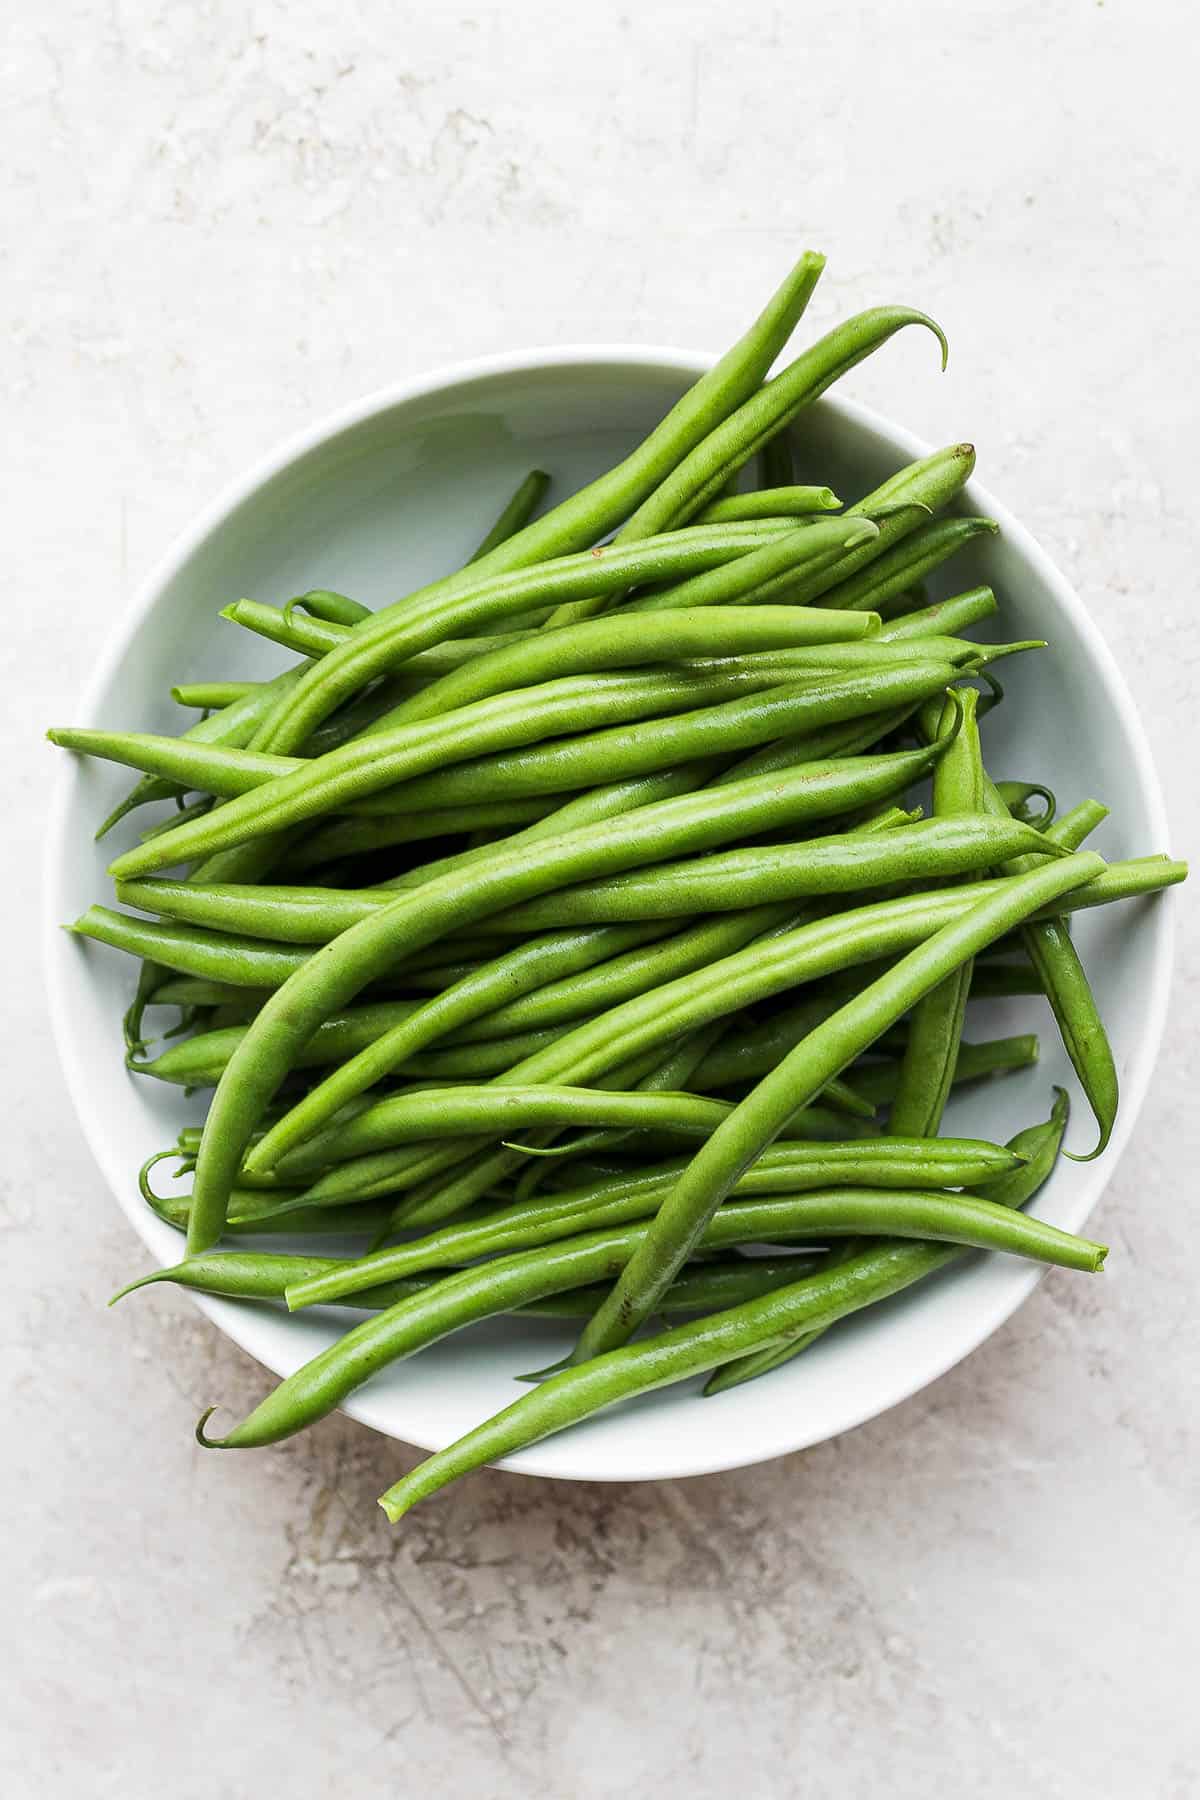 Washed and trimmed green beans in a bowl.